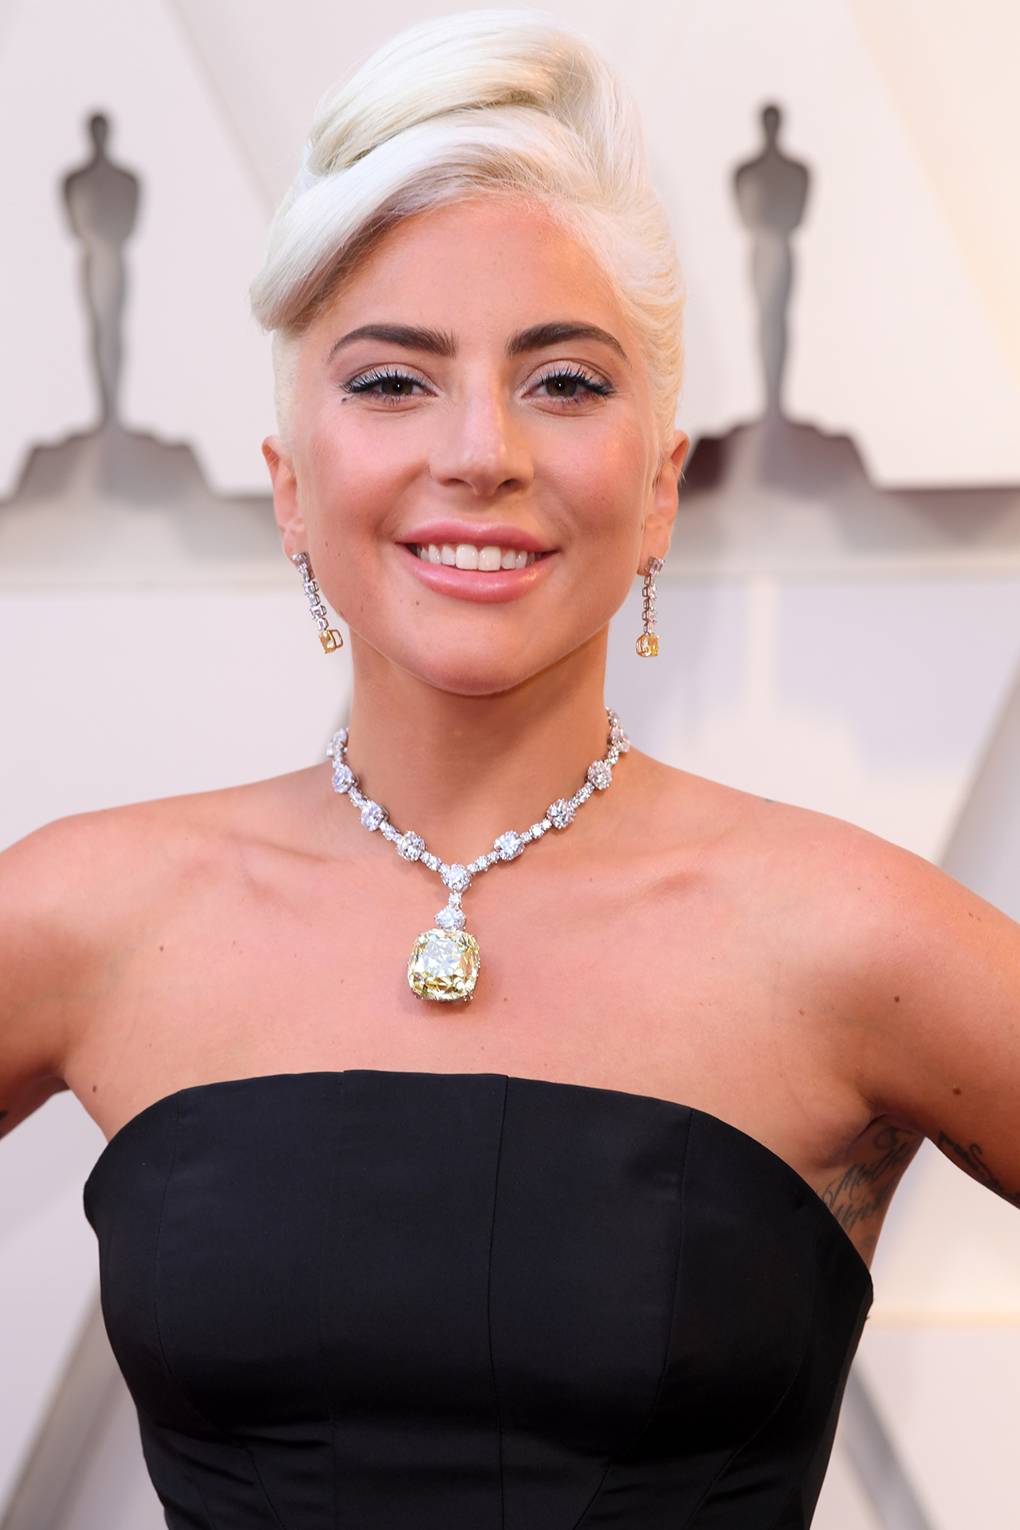 tiffany and co necklace lady gaga